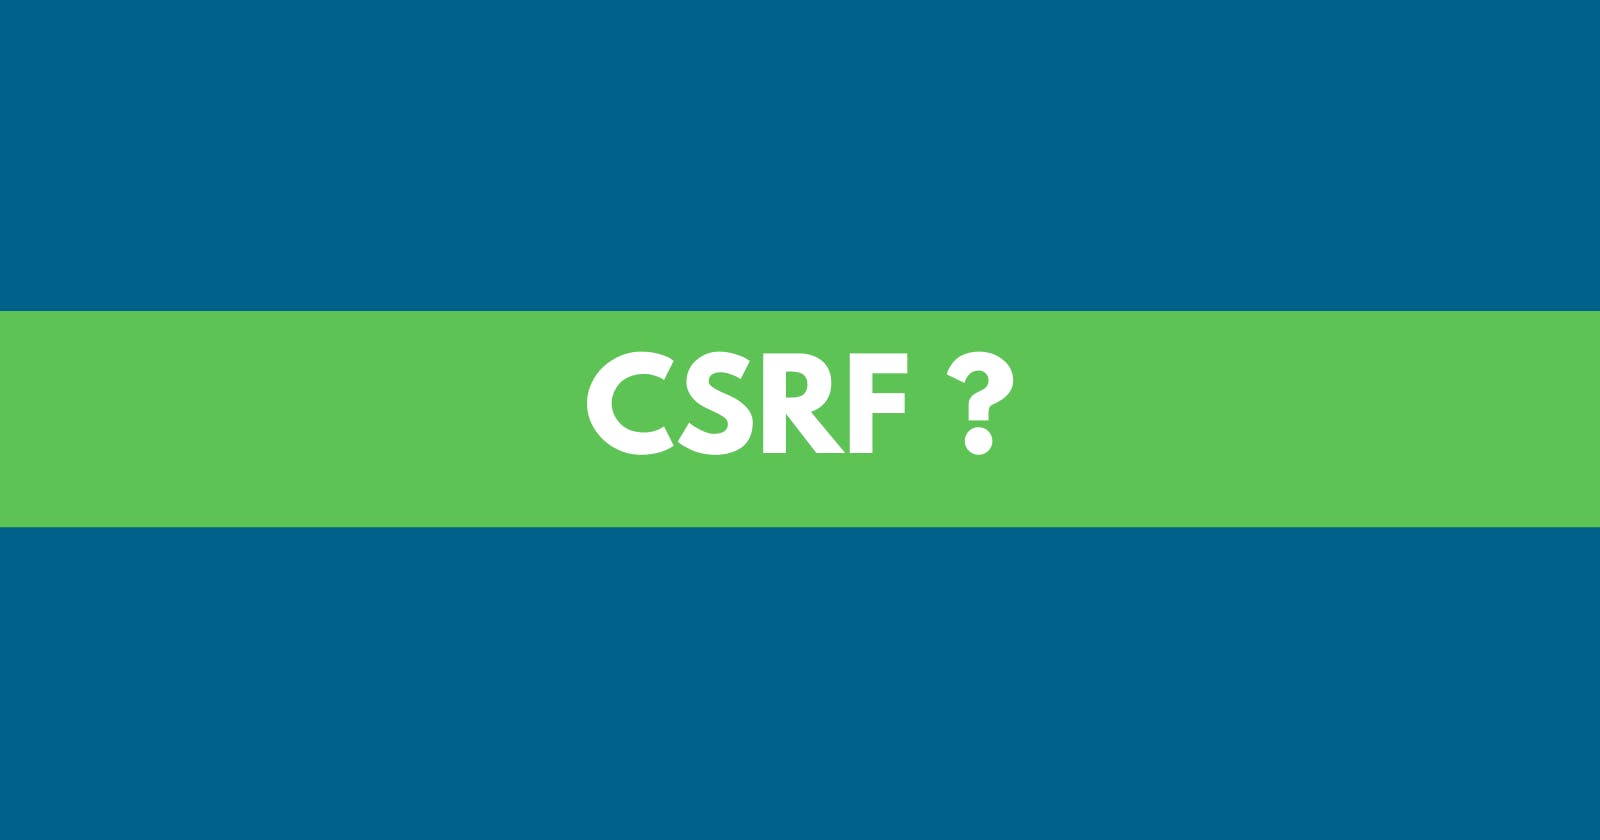 Spring Security: What is CSRF all about?